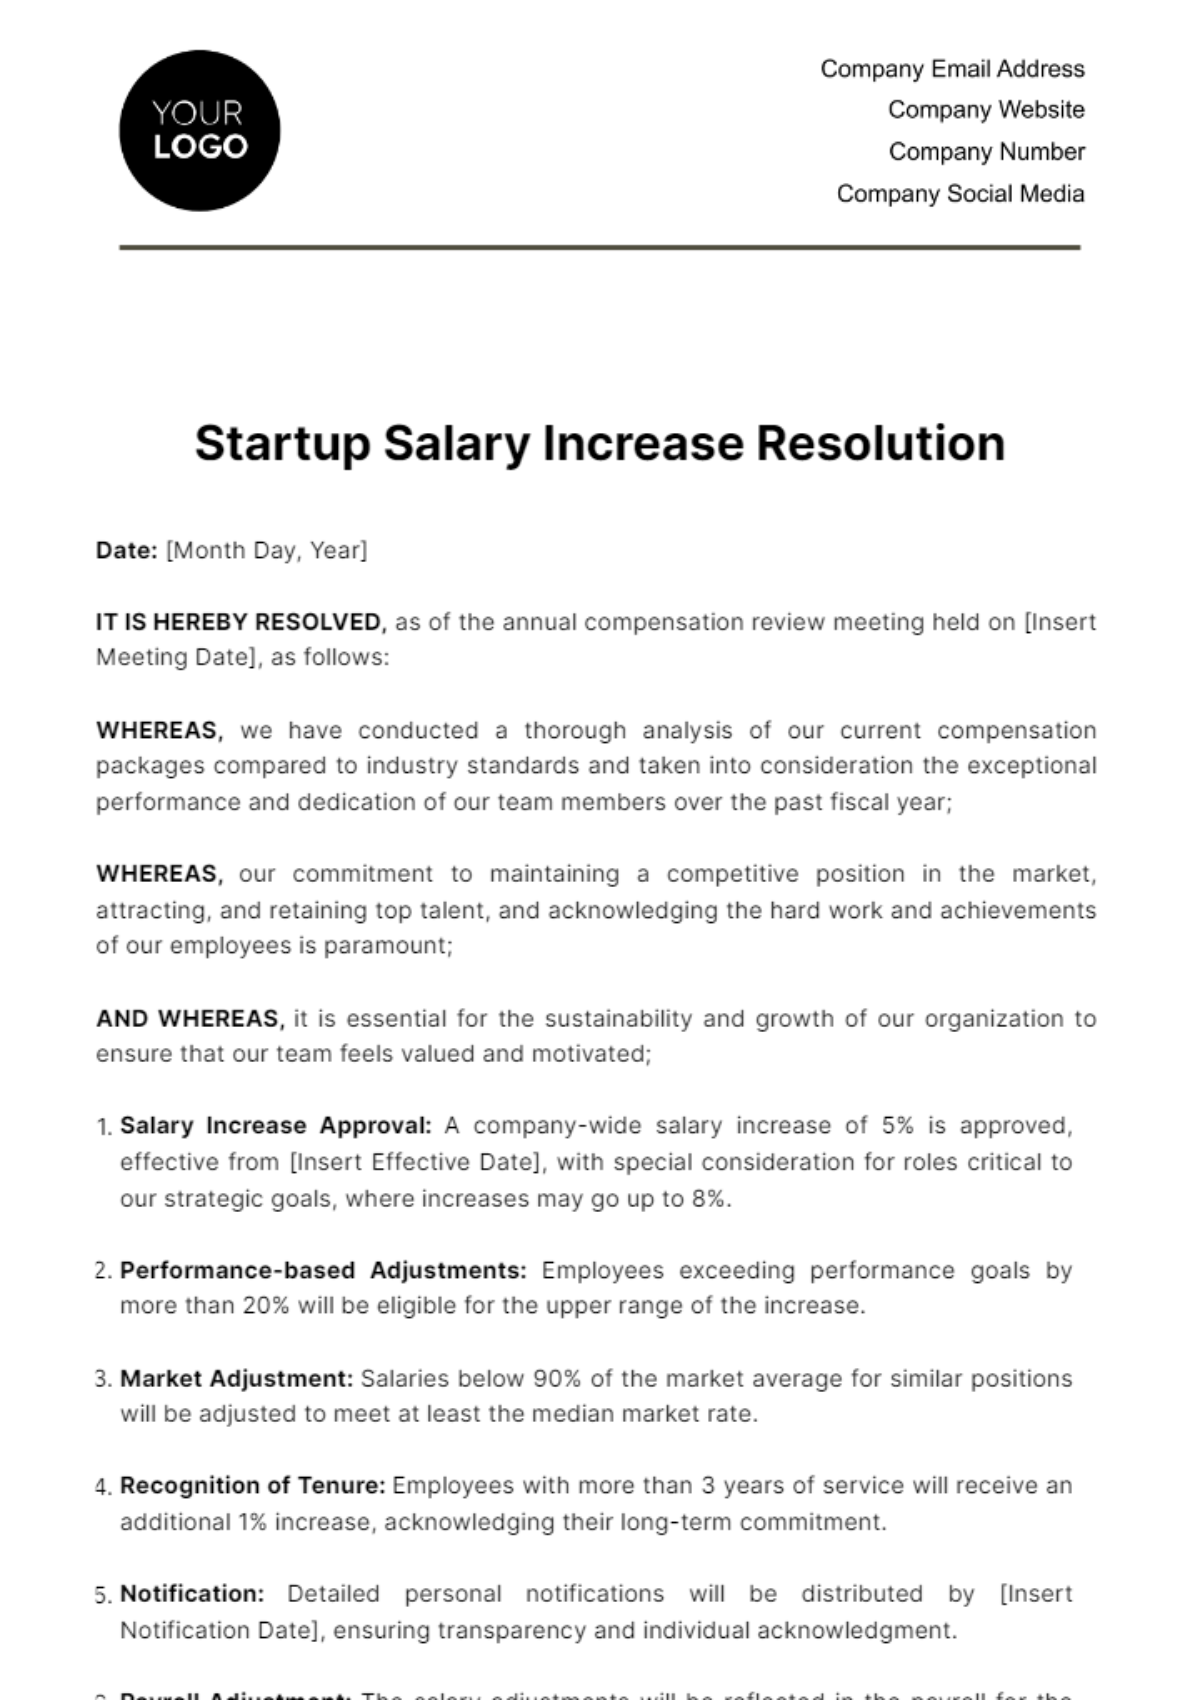 Startup Salary Increase Resolution Template